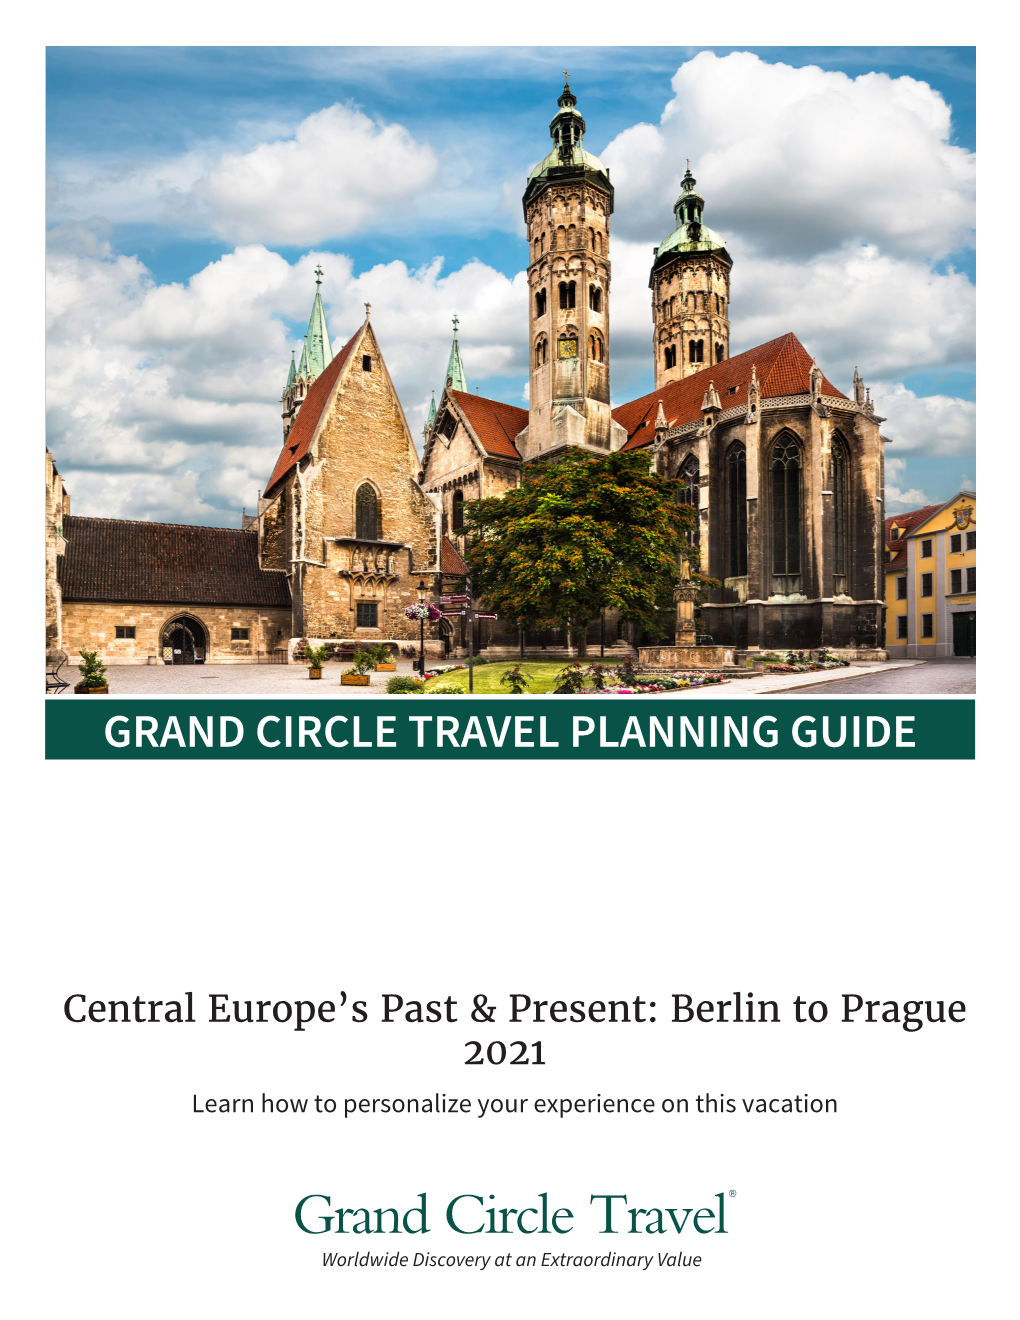 Download Your Travel Planning Guide